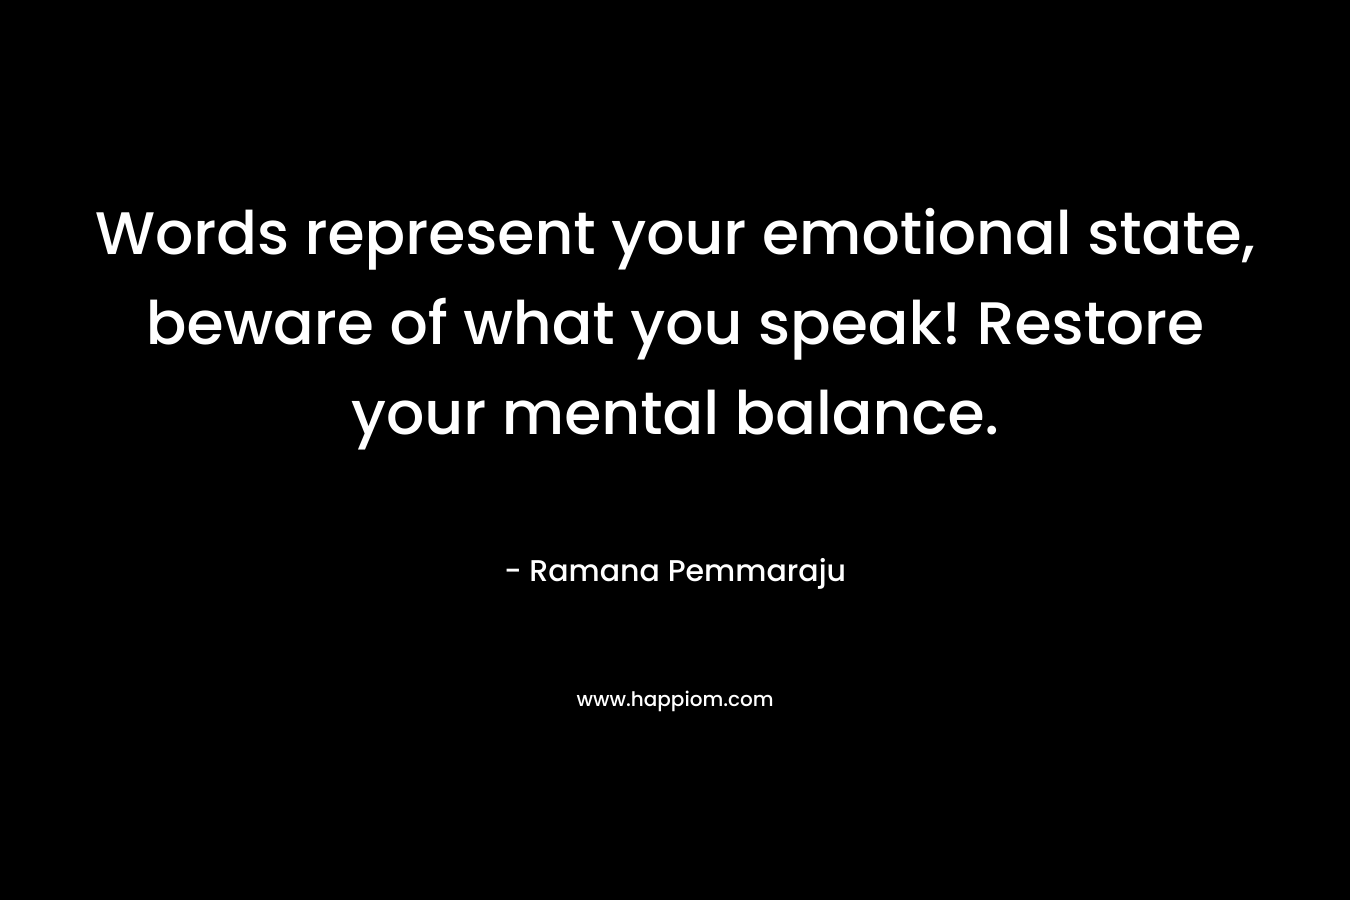 Words represent your emotional state, beware of what you speak! Restore your mental balance.